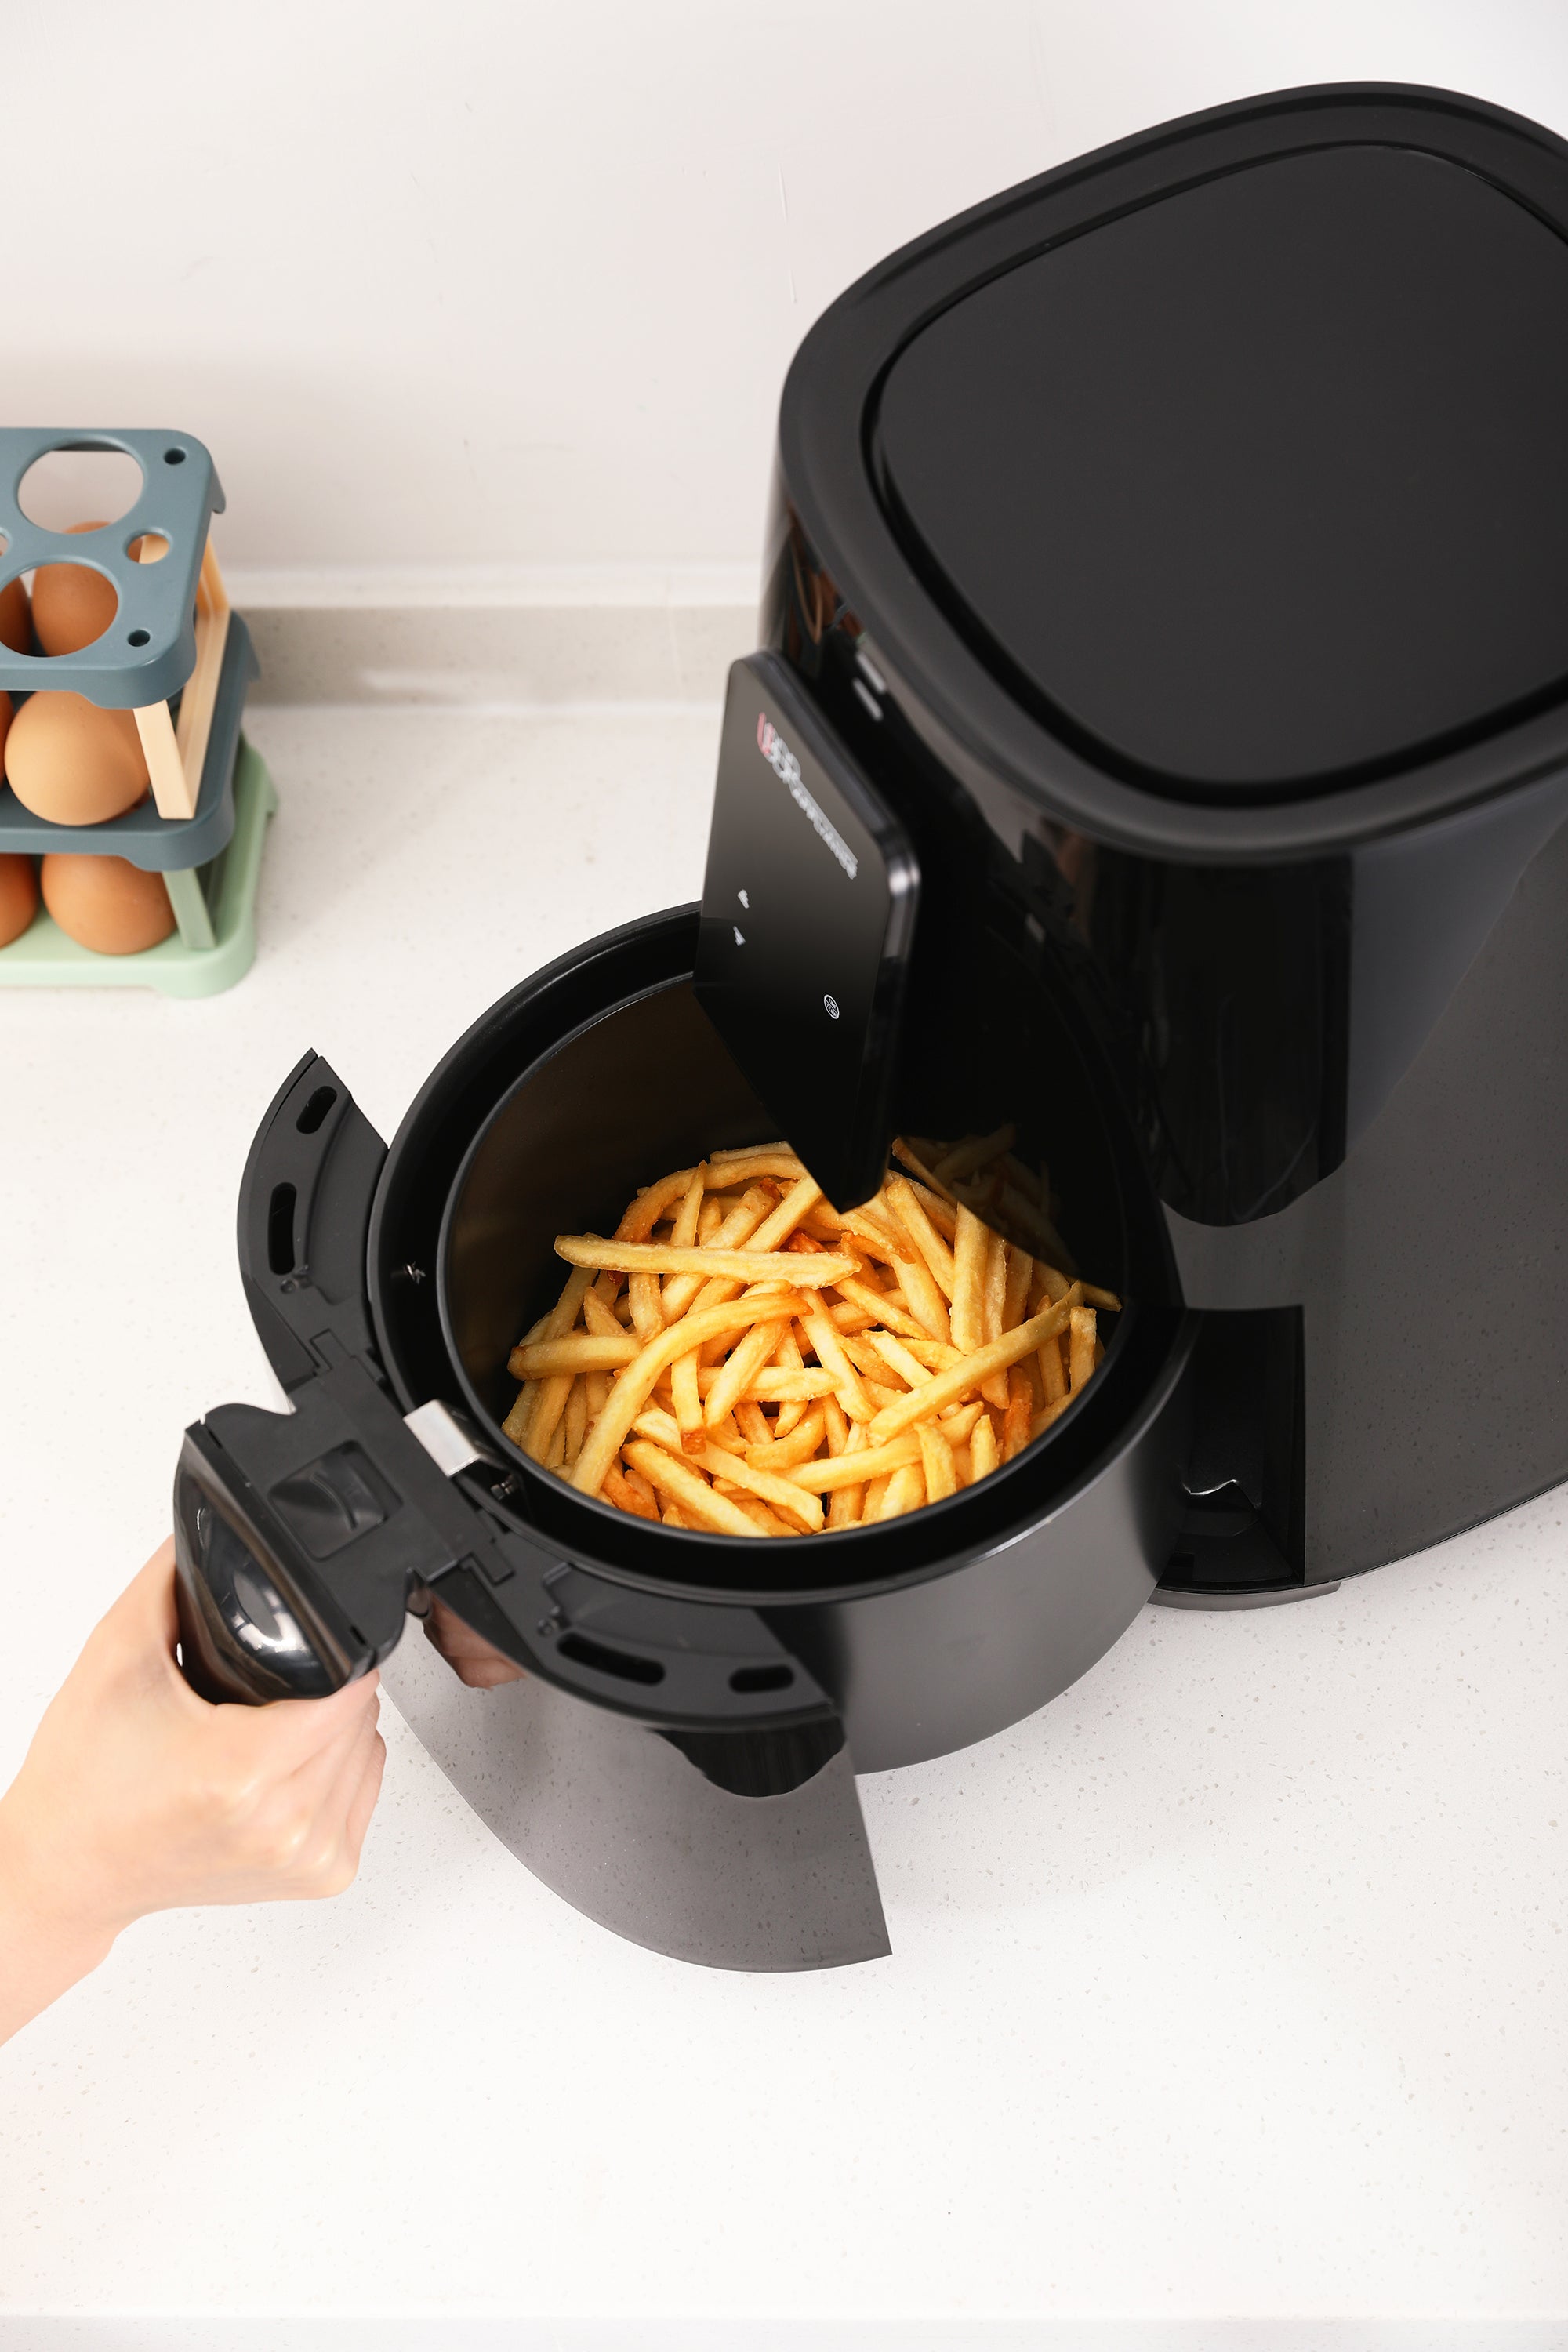 What is an air Fryer and how does it work?